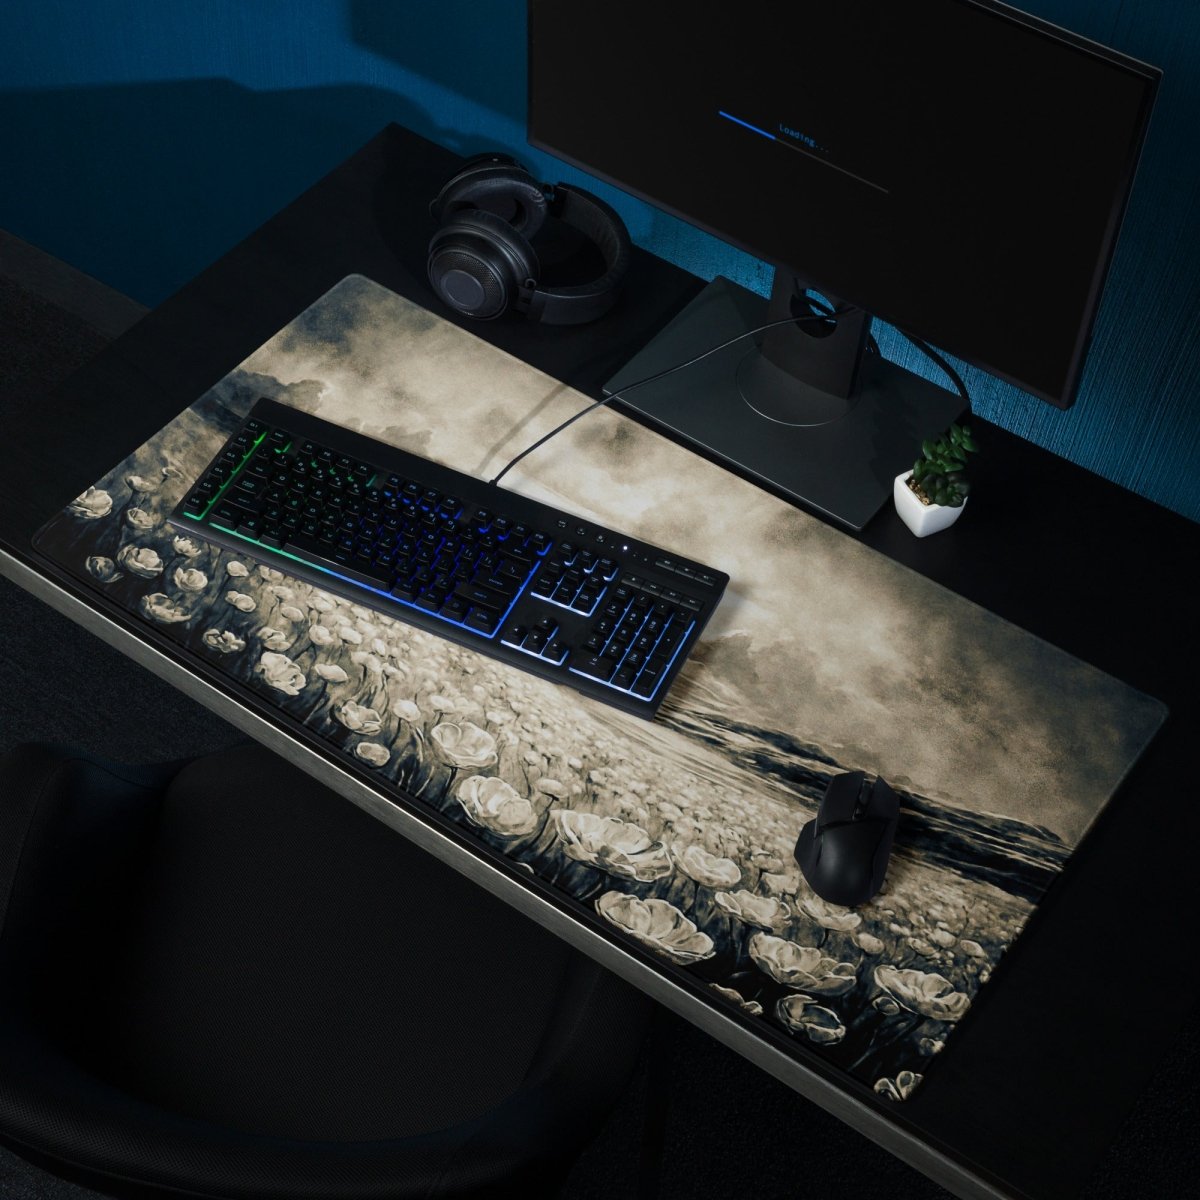 Murky morning - Gaming mouse pad - Ever colorful